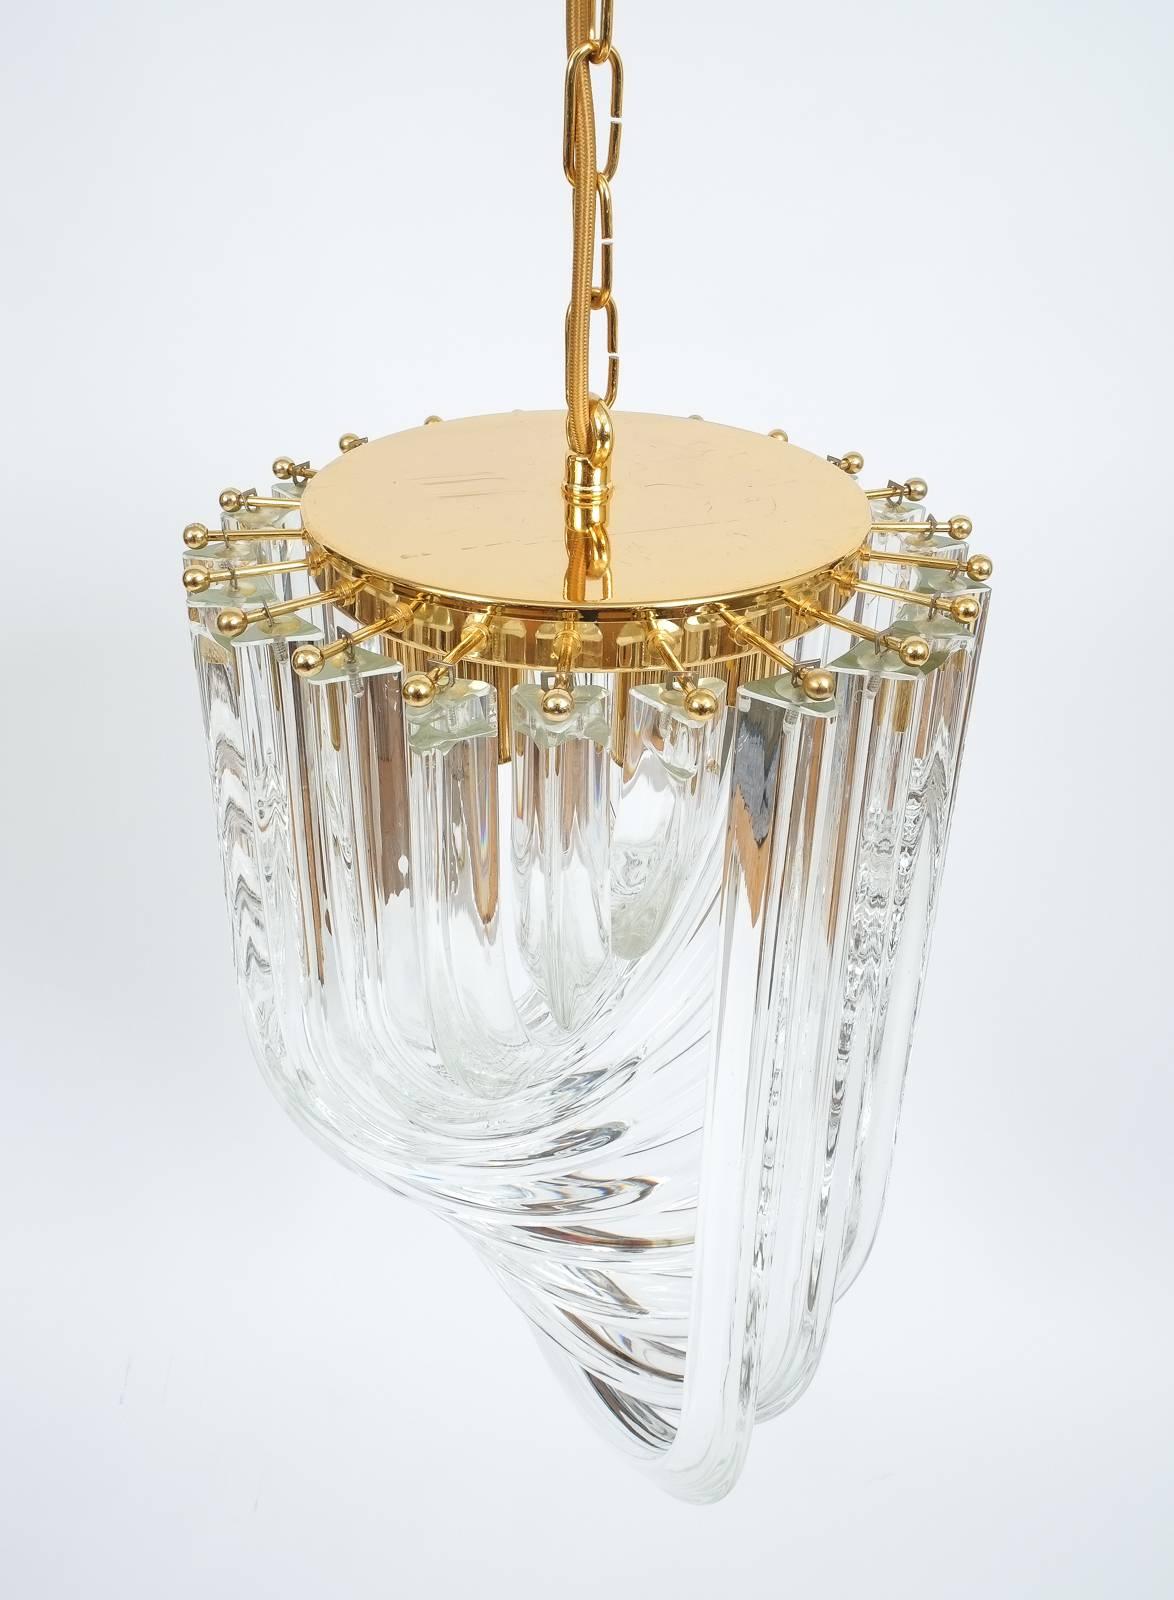 One of Three Venini Curved Crystal Glass Gilt Brass Chandelier, priced per piece, discount available for multiple purchase

Pristine Triete crystal glass chandelier with interlocking bended triete crystal rods in helix formation. We have a total of